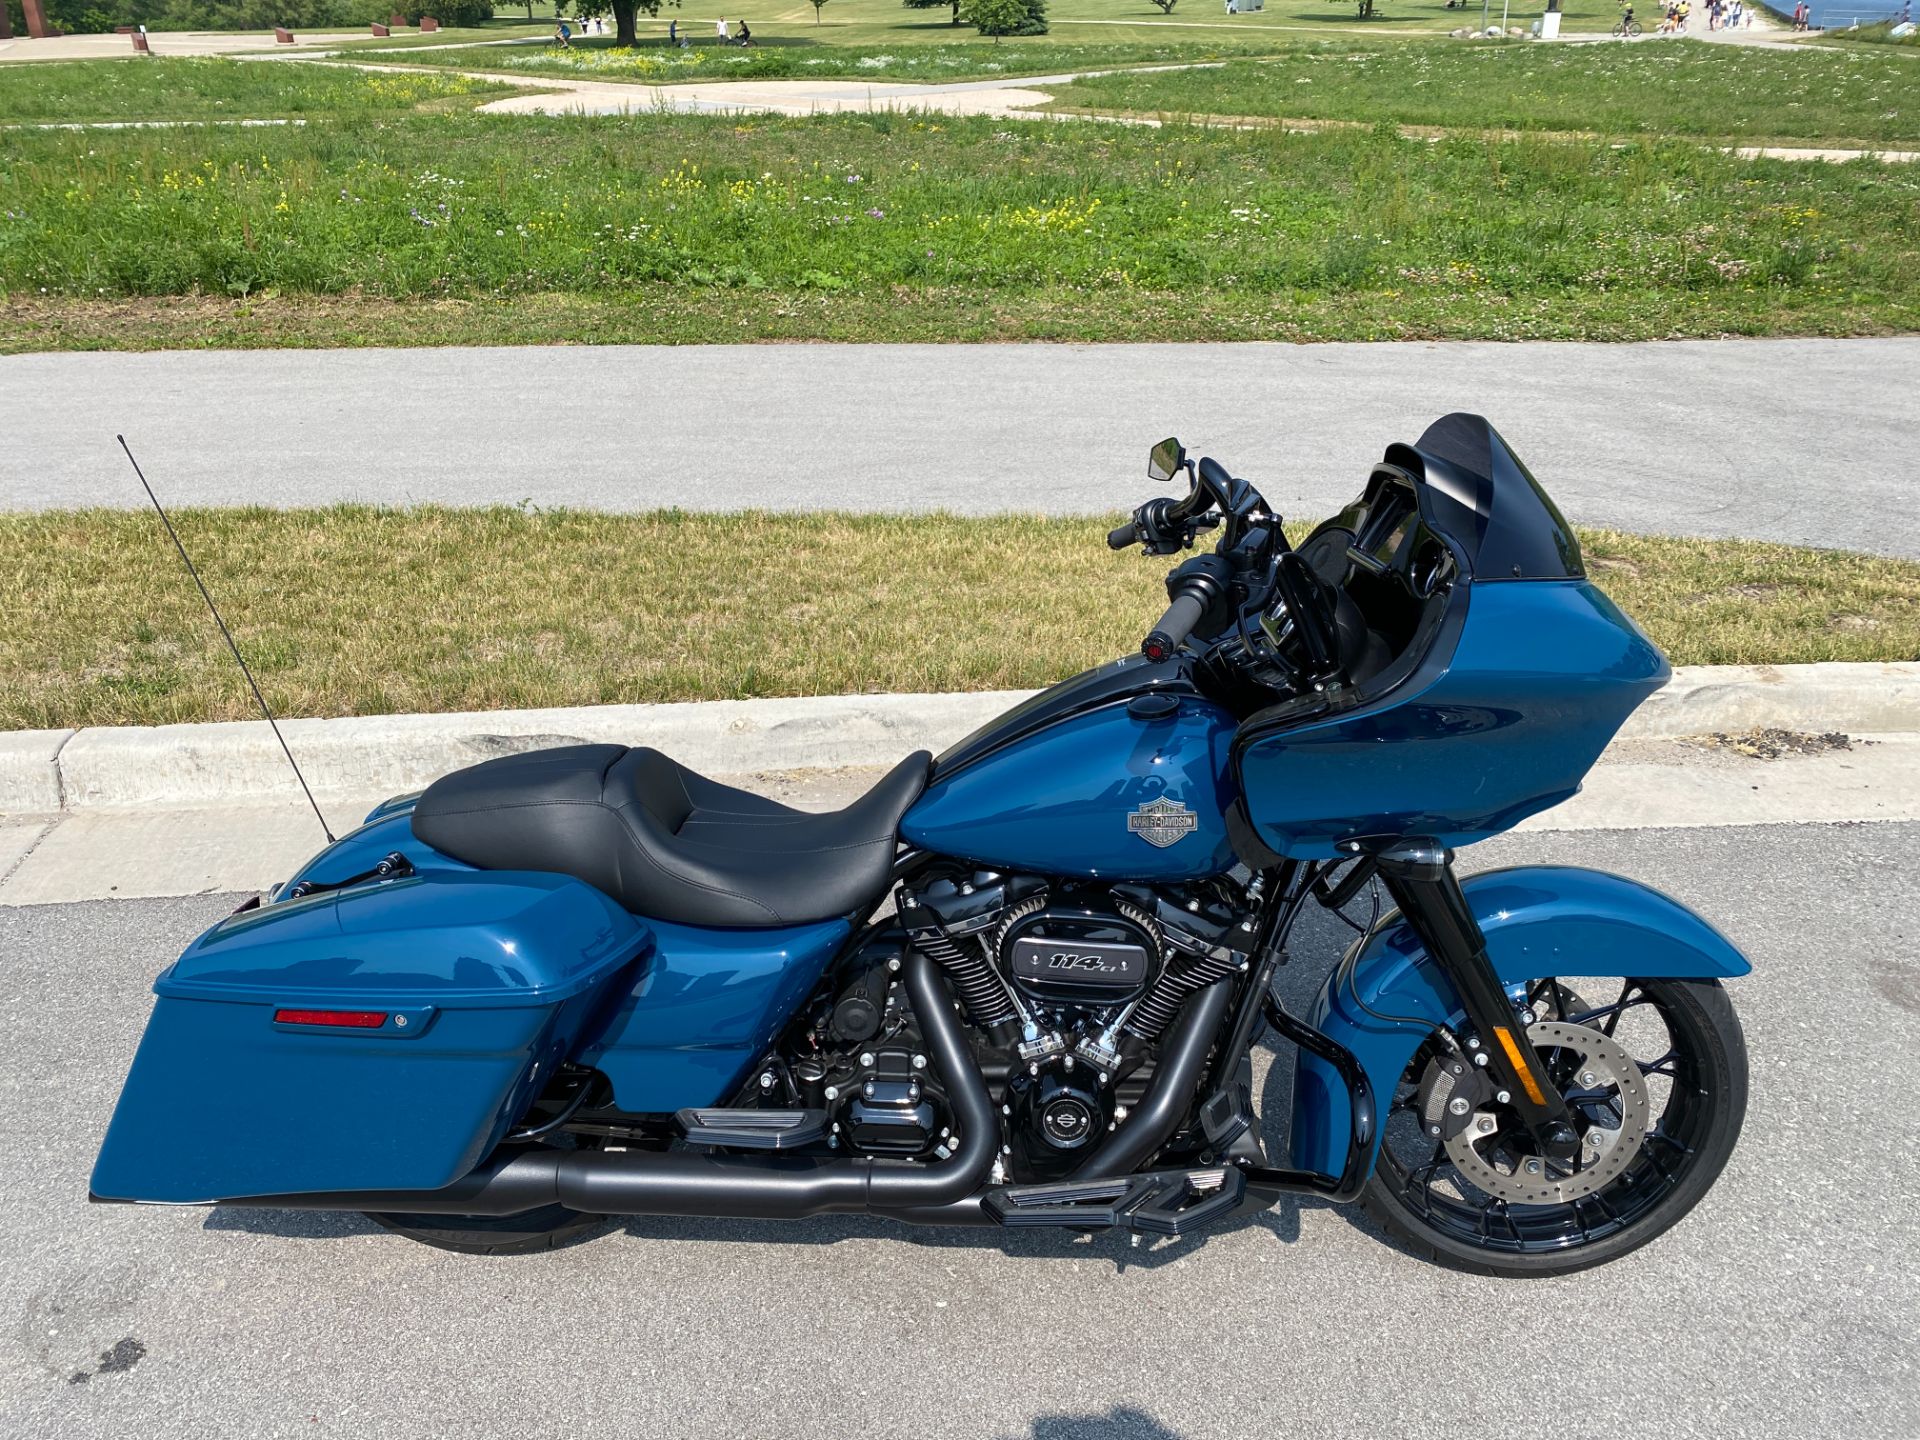 2021 Harley-Davidson Road Glide® Special in Big Bend, Wisconsin - Photo 2